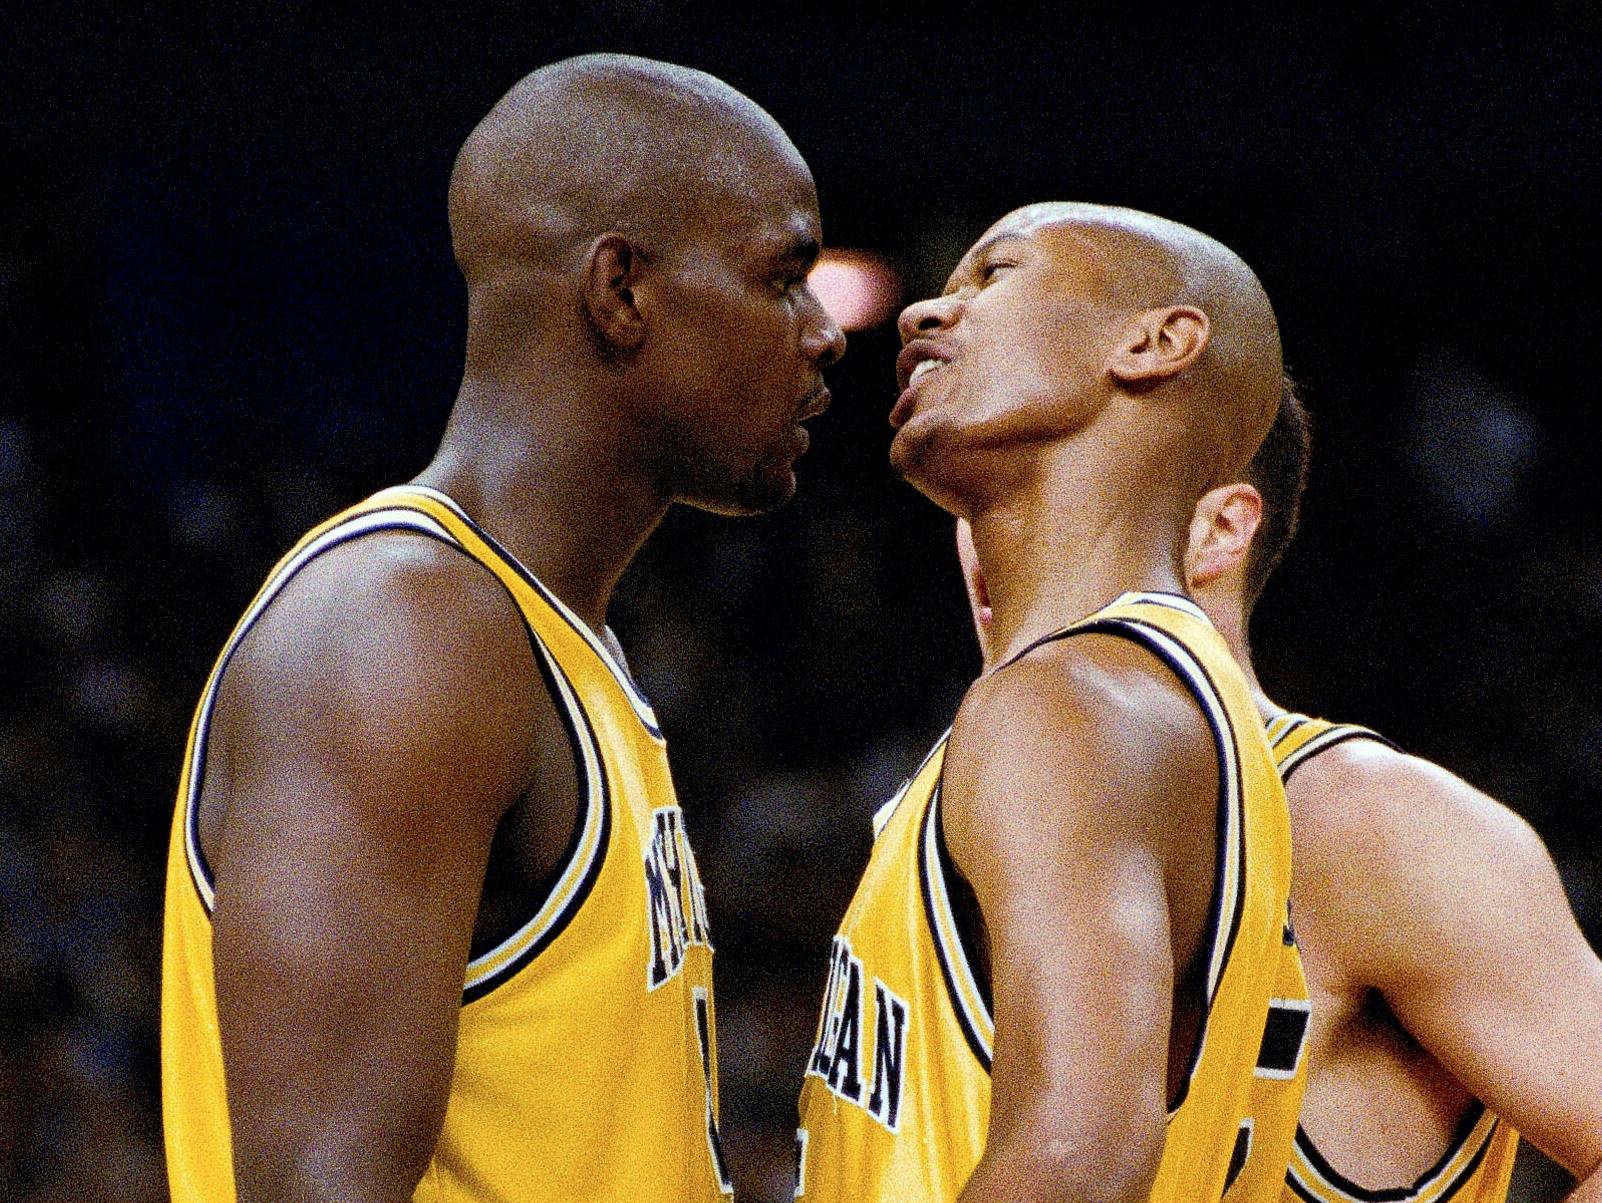 Jalen Rose Wants Chris Webber to Apologize for ‘Transgressions’ at Michigan